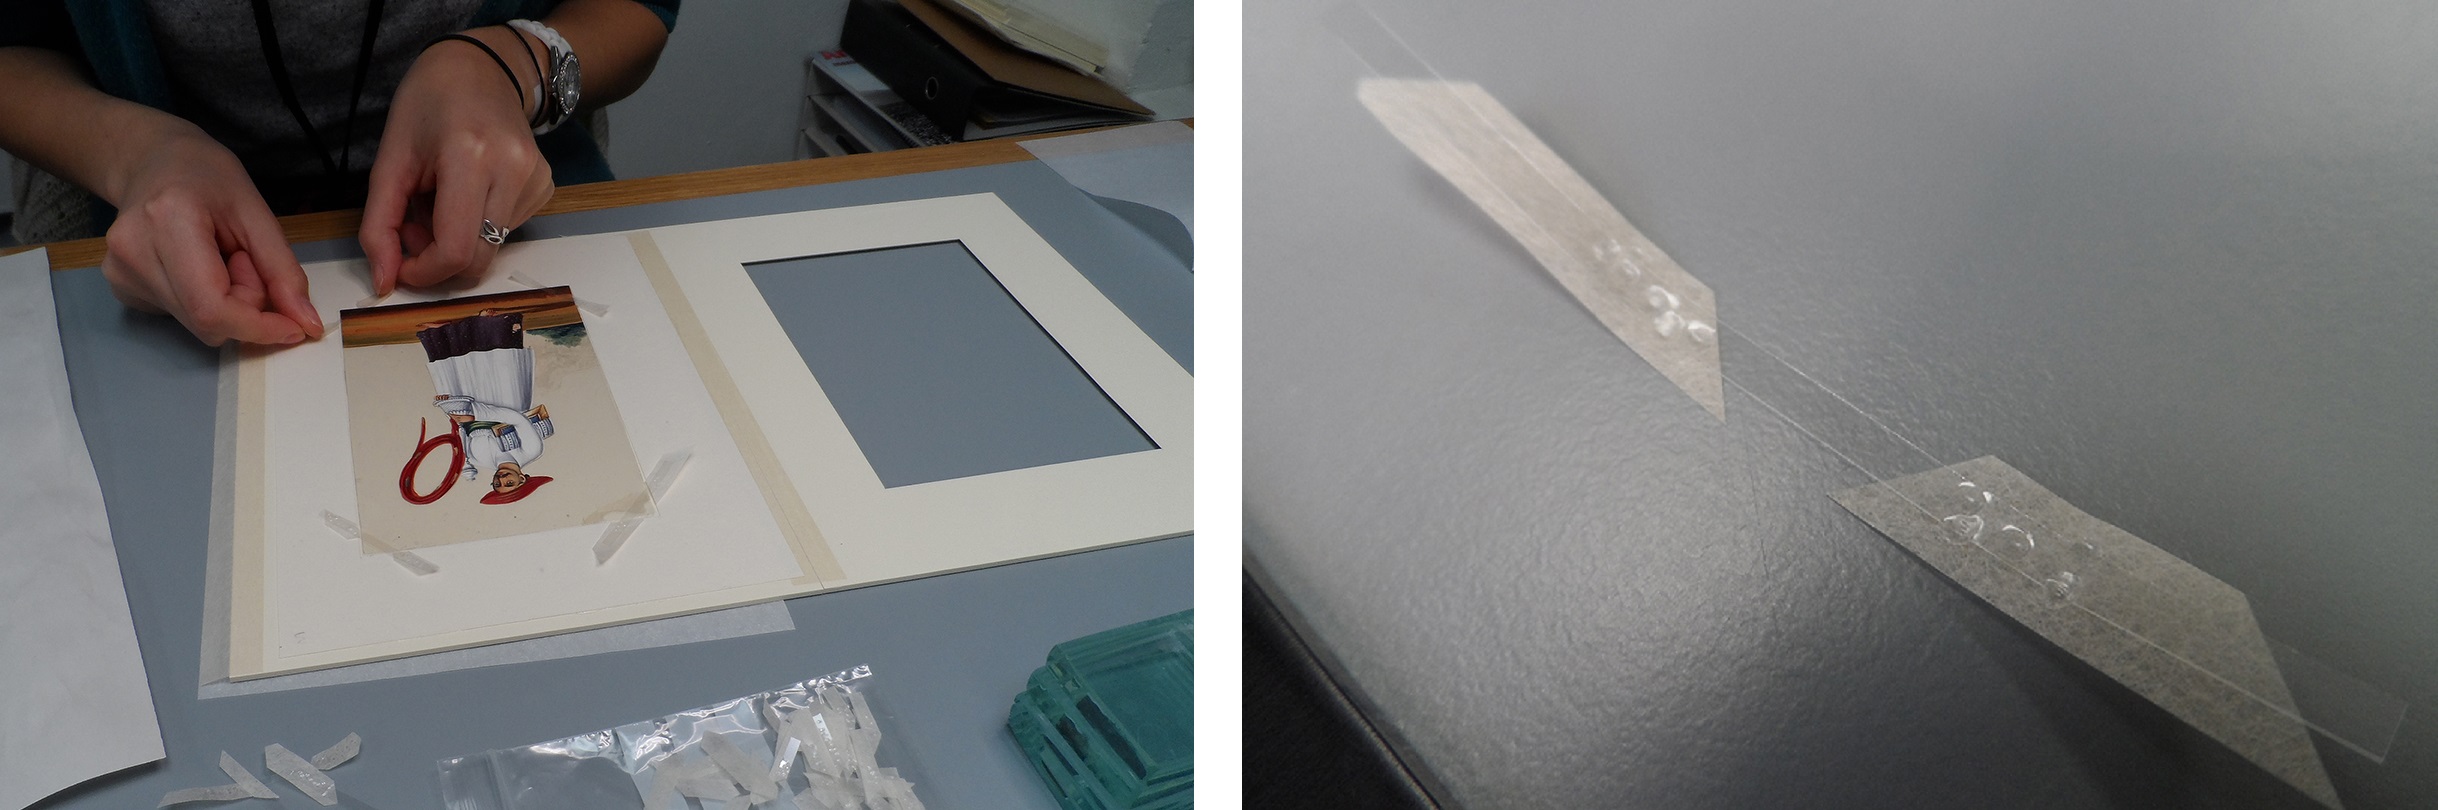 (L) Adhering restraining strips recess over the corners of the mica painting (R) Detail of a finished polyethylene and Japanese tissue strip